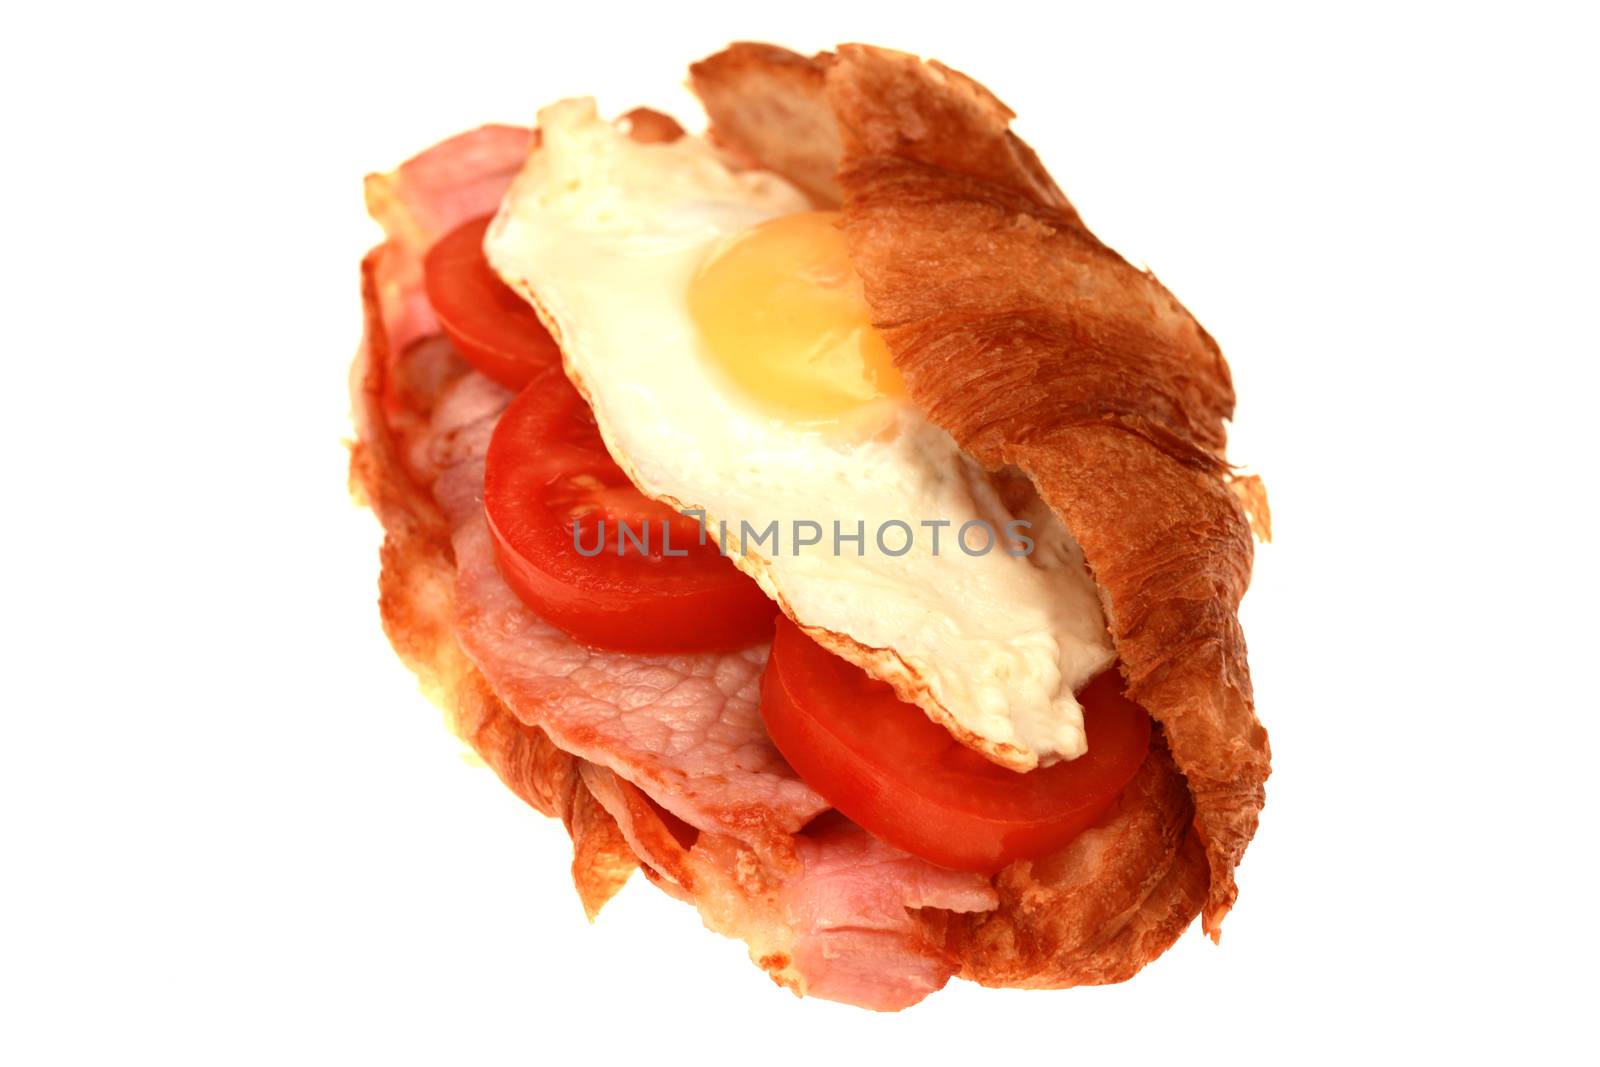 Bacon and Egg Croissant